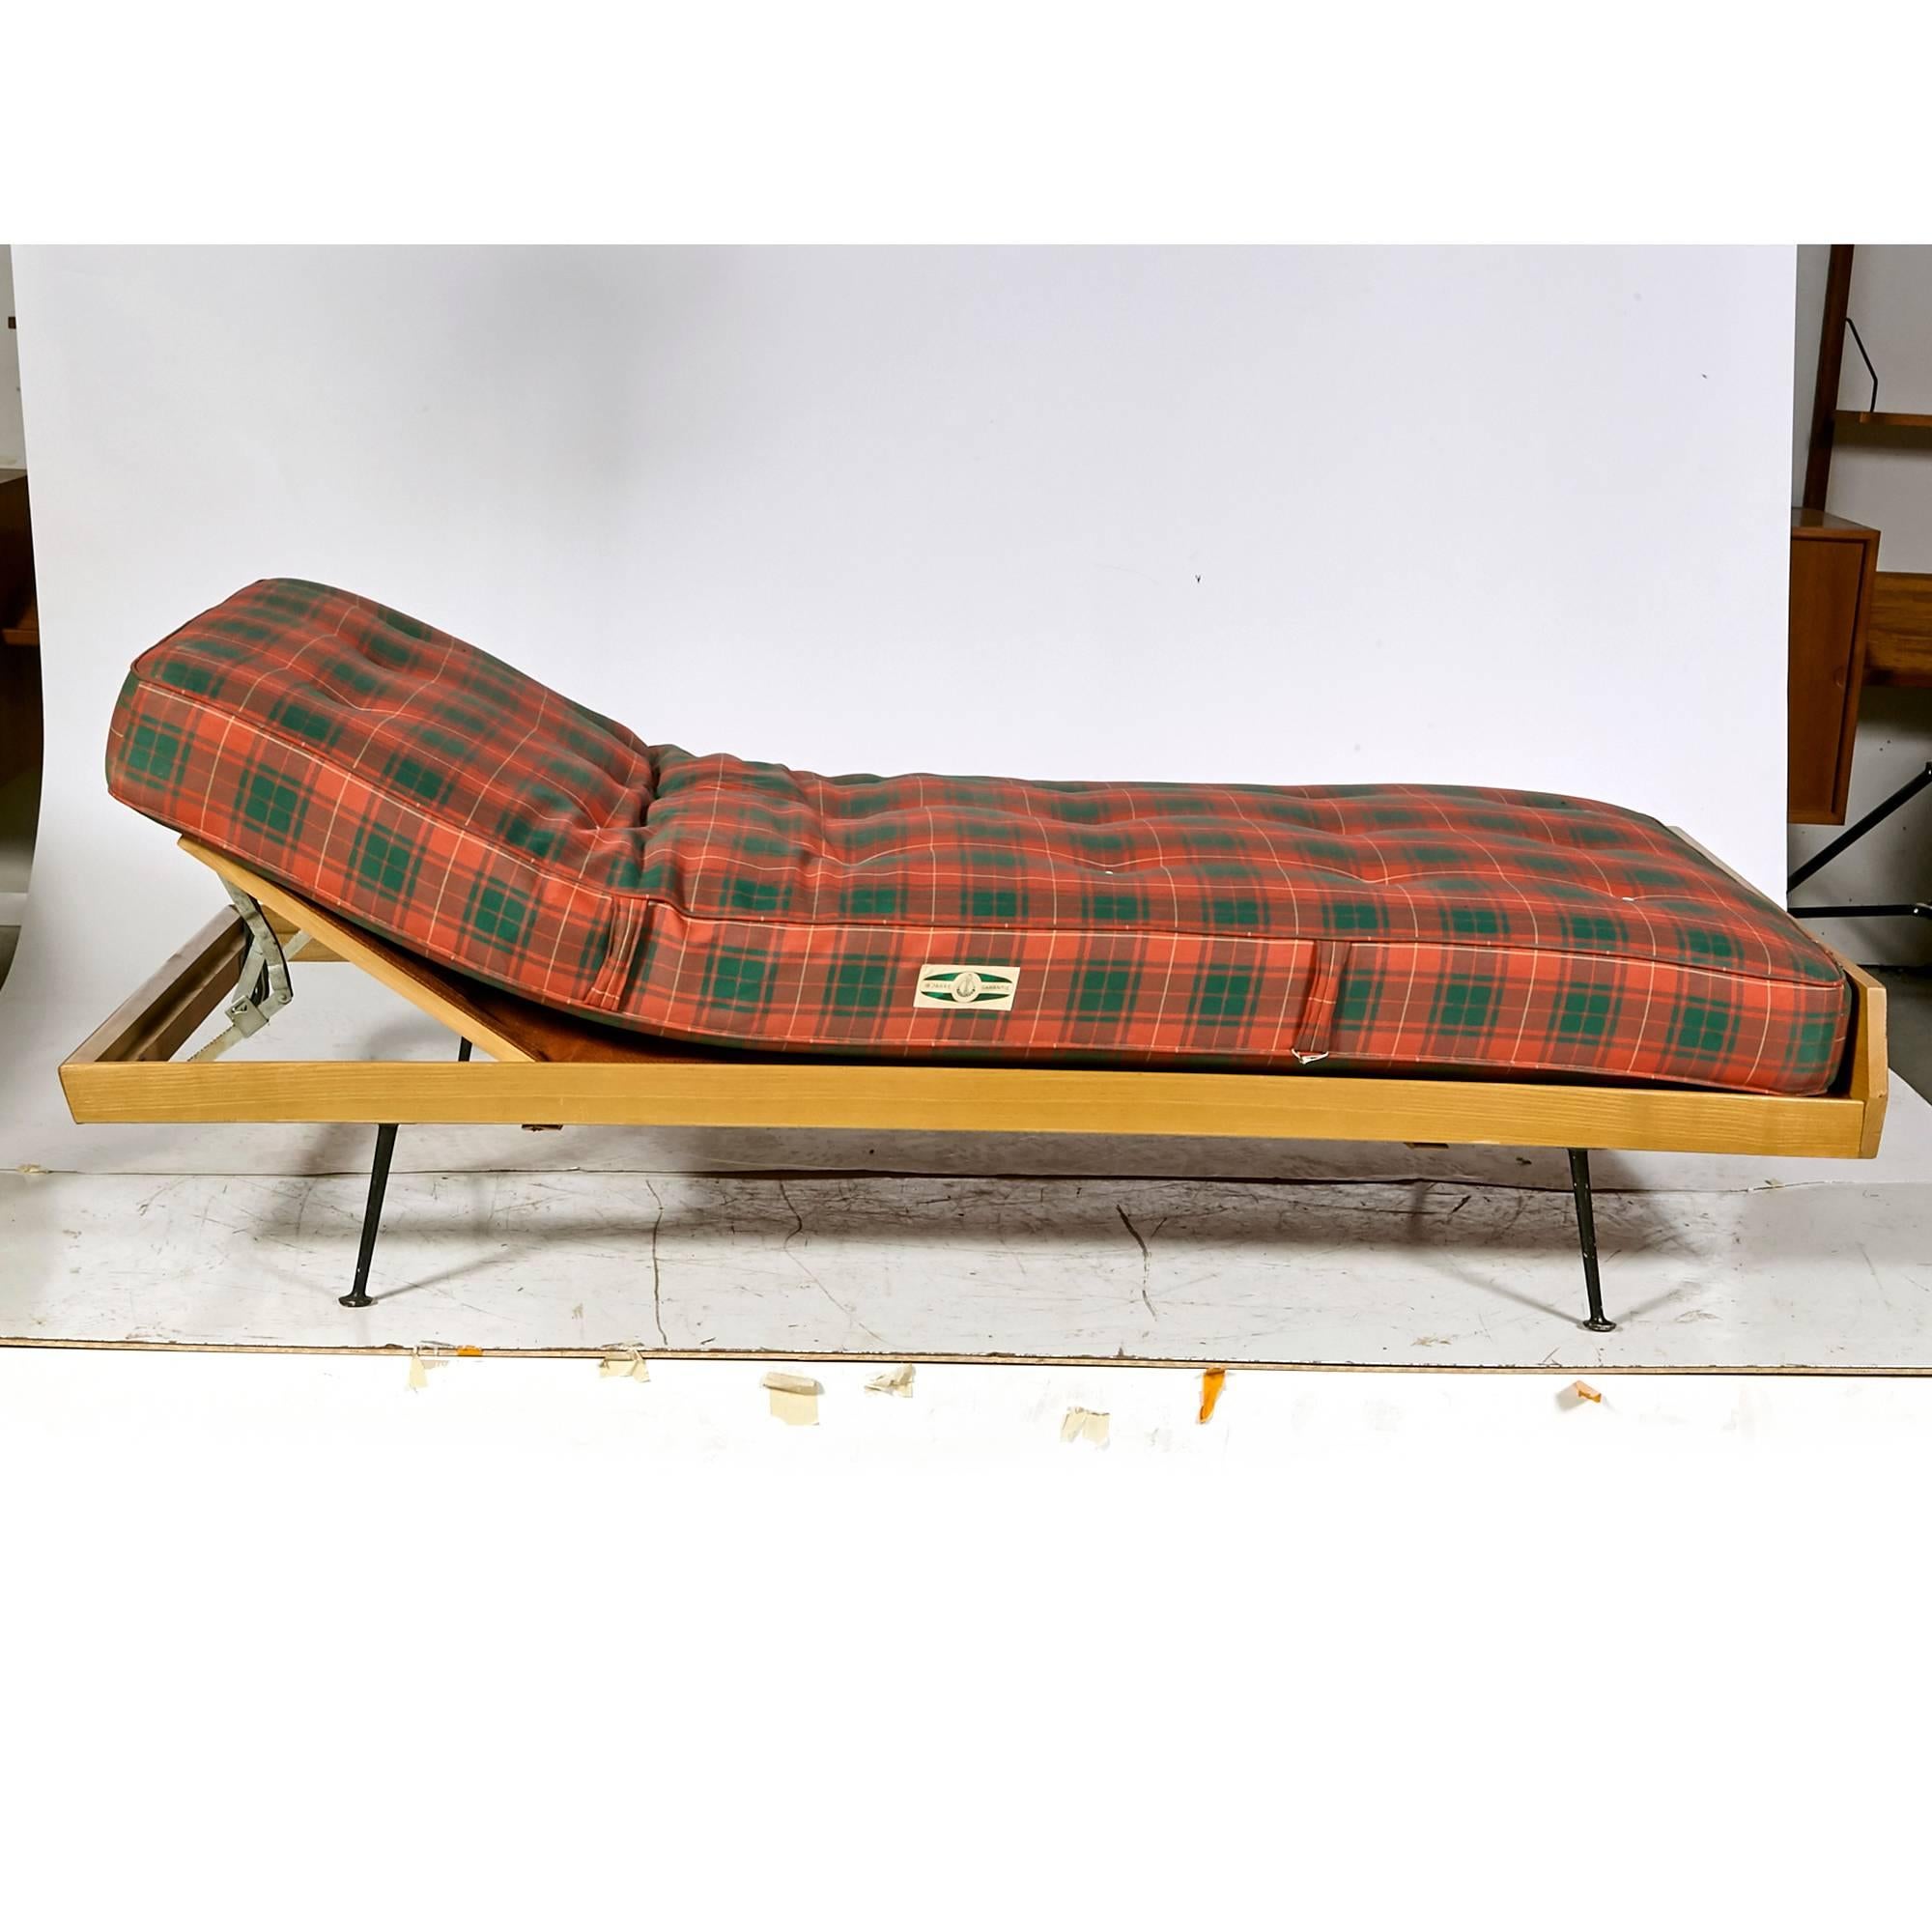 Vintage German daybed with original mattress on thin slanted black metal legs. The daybed tilts up or remains flat. Daybed is unmarked but attributed to 
WK Möbel of Germany. Mattress is marked. In original condition.

Measure: Bed 10.5